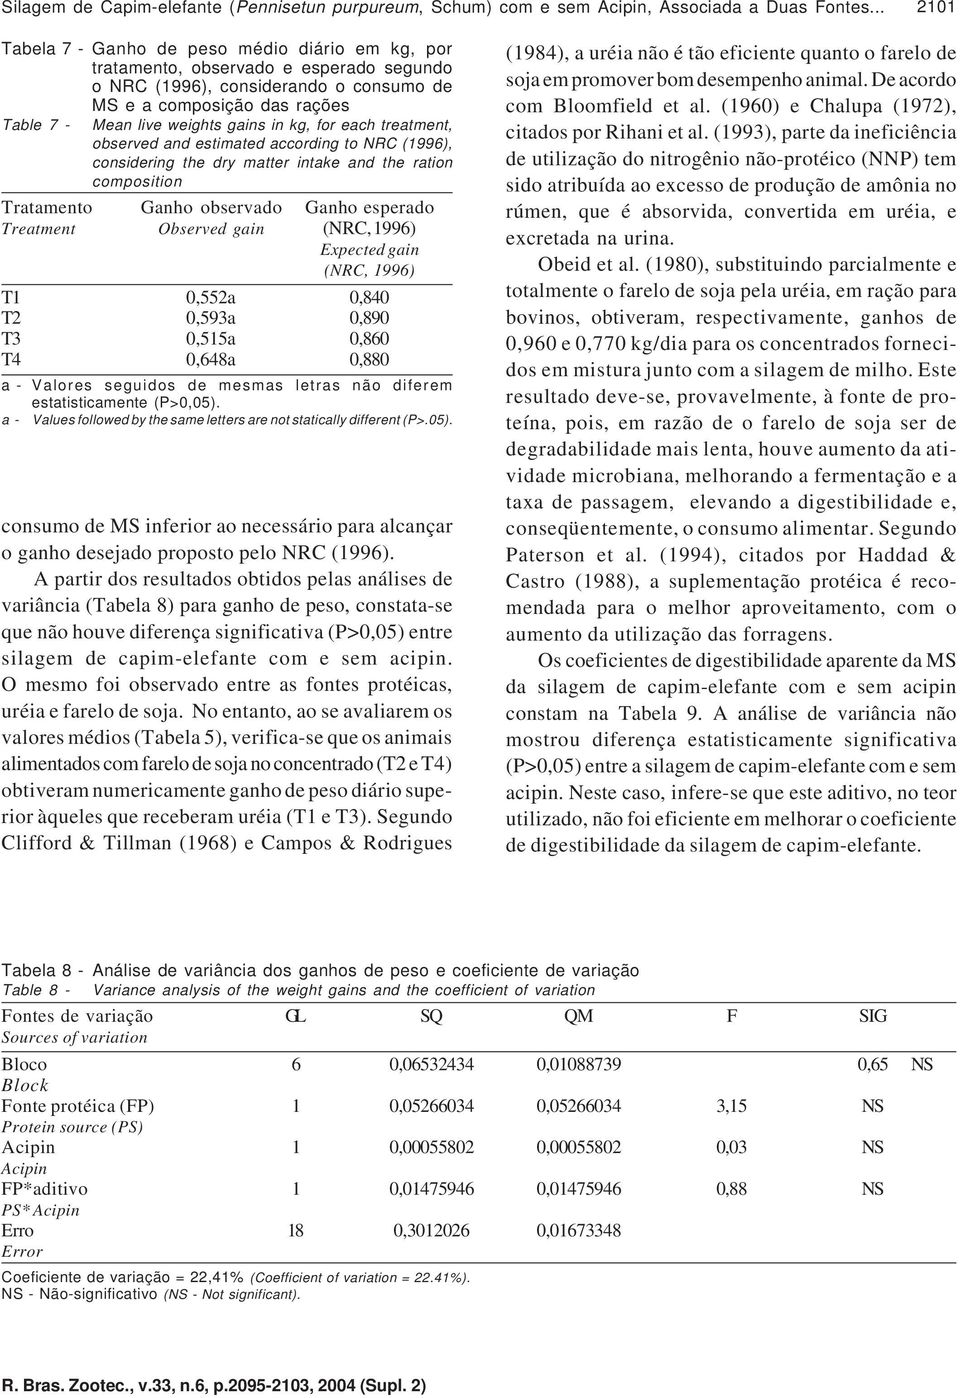 gains in kg, for each treatment, observed and estimated according to NRC (1996), considering the dry matter intake and the ration composition Tratamento Ganho observado Ganho esperado Treatment